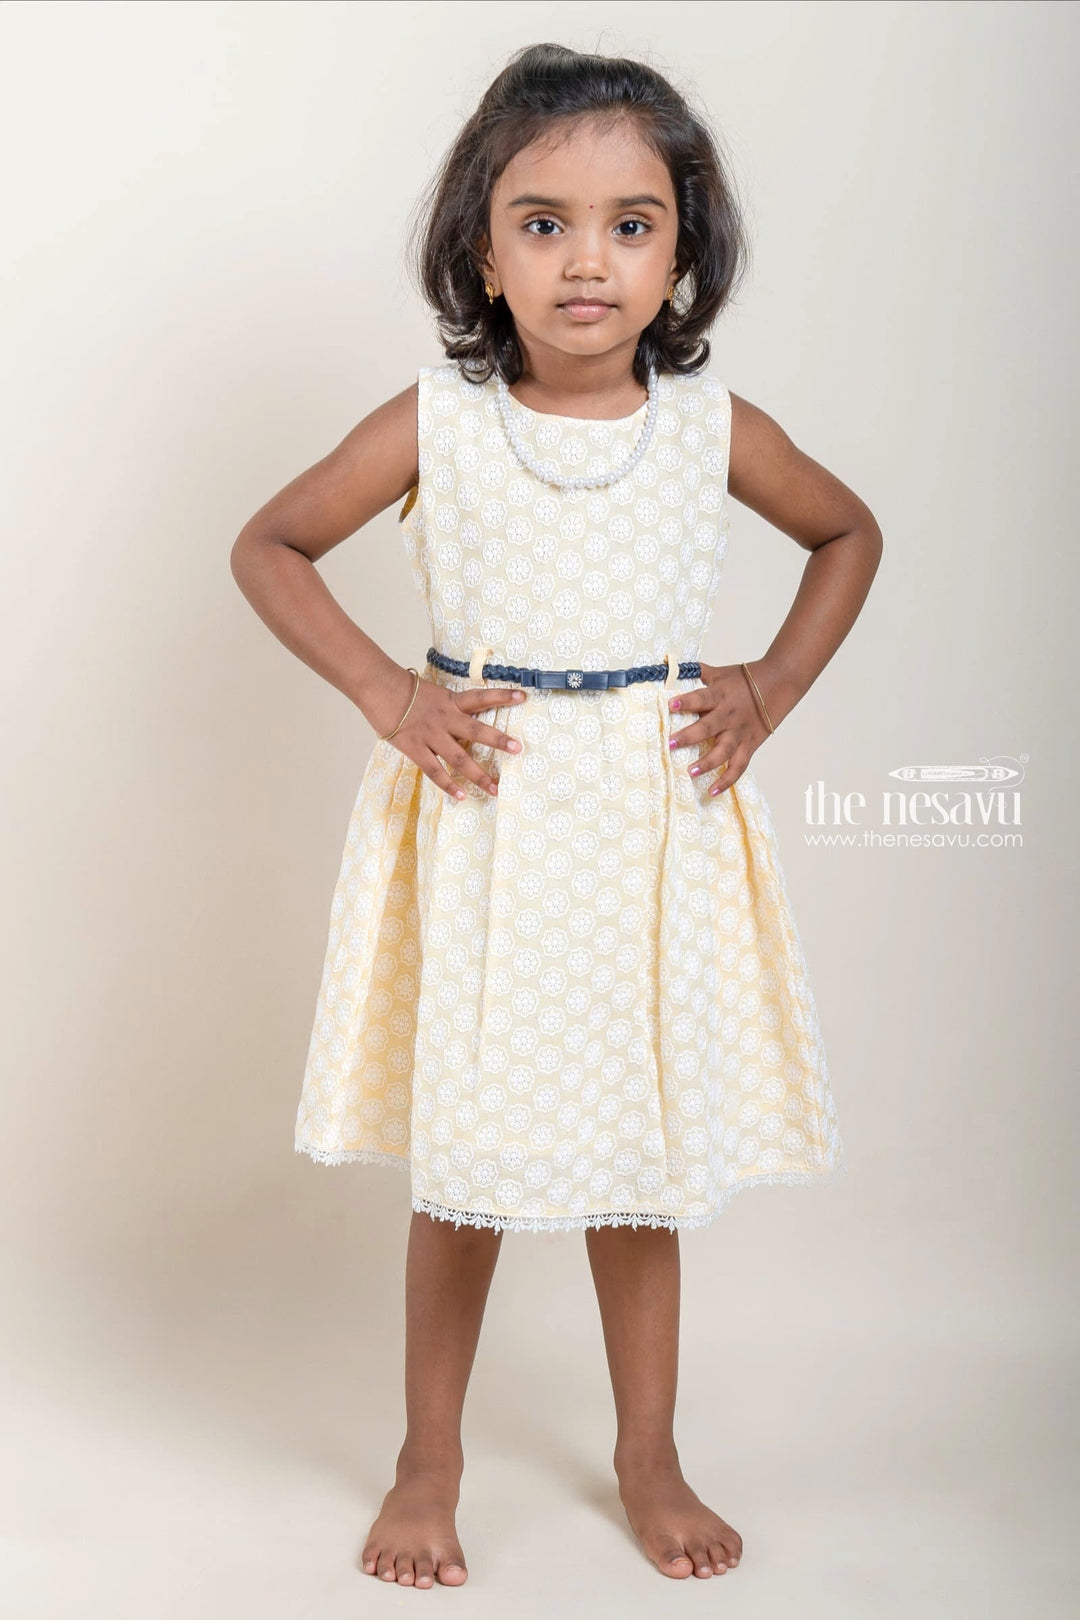 The Nesavu Baby Cotton Frocks Trendy All Over Floral Embroidered Yellow Bamboo Cotton Frock For Baby Girls Nesavu 14 (6M) / Yellow / Cotton BFJ425C-14 Baby Girls Casual Frocks | Latest Yellow Floral Design frock | The Nesavu